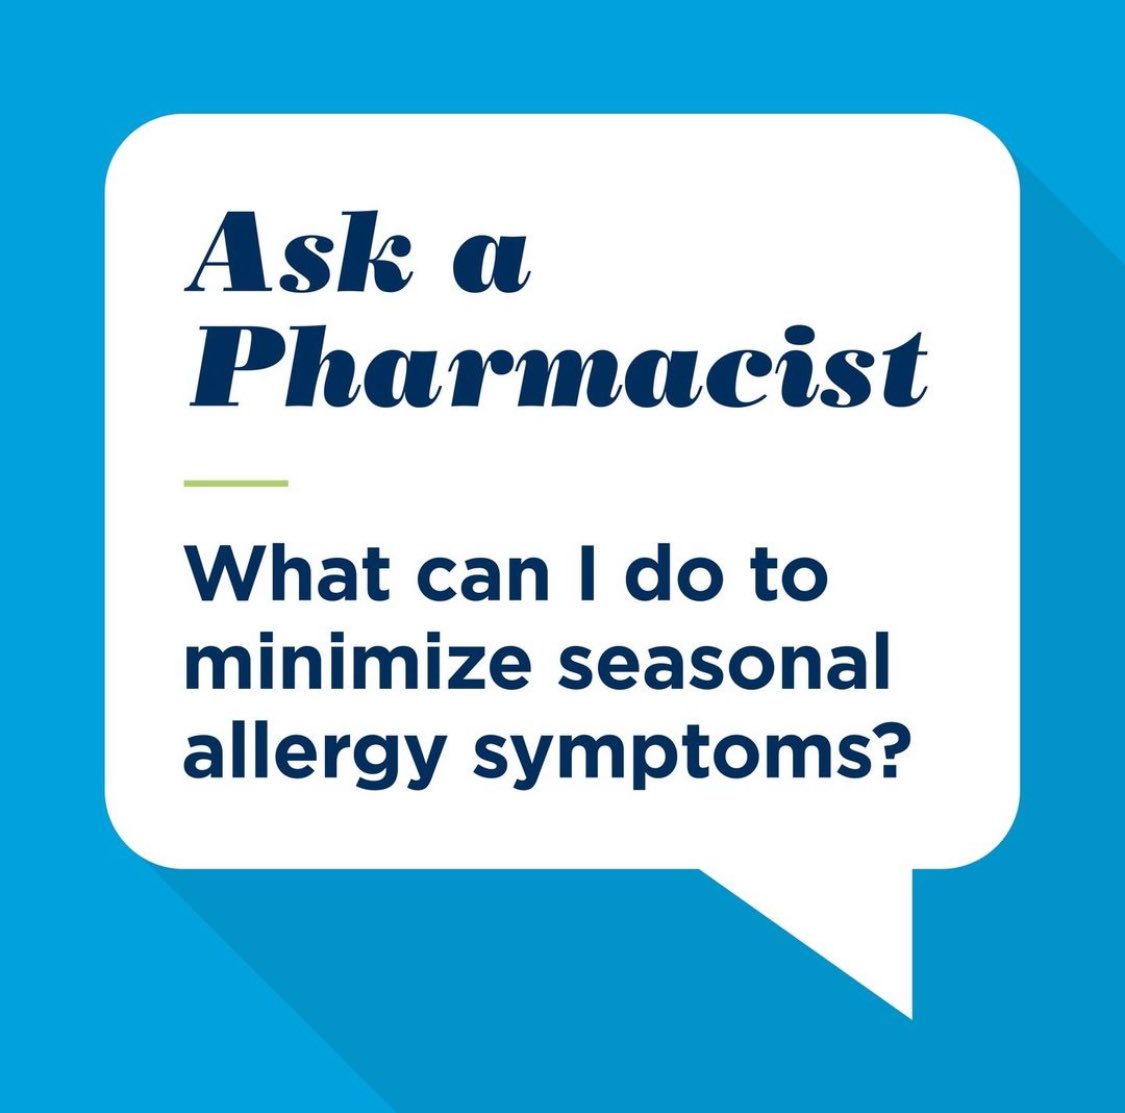 From avoiding triggers to trying over-the-counter treatments, there are many things you can do to minimize your seasonal allergy symptoms. For advice on choosing an allergy treatment option specific to your symptoms, speak with our pharmacist. 
#AskaPharmacist #AllergySeason